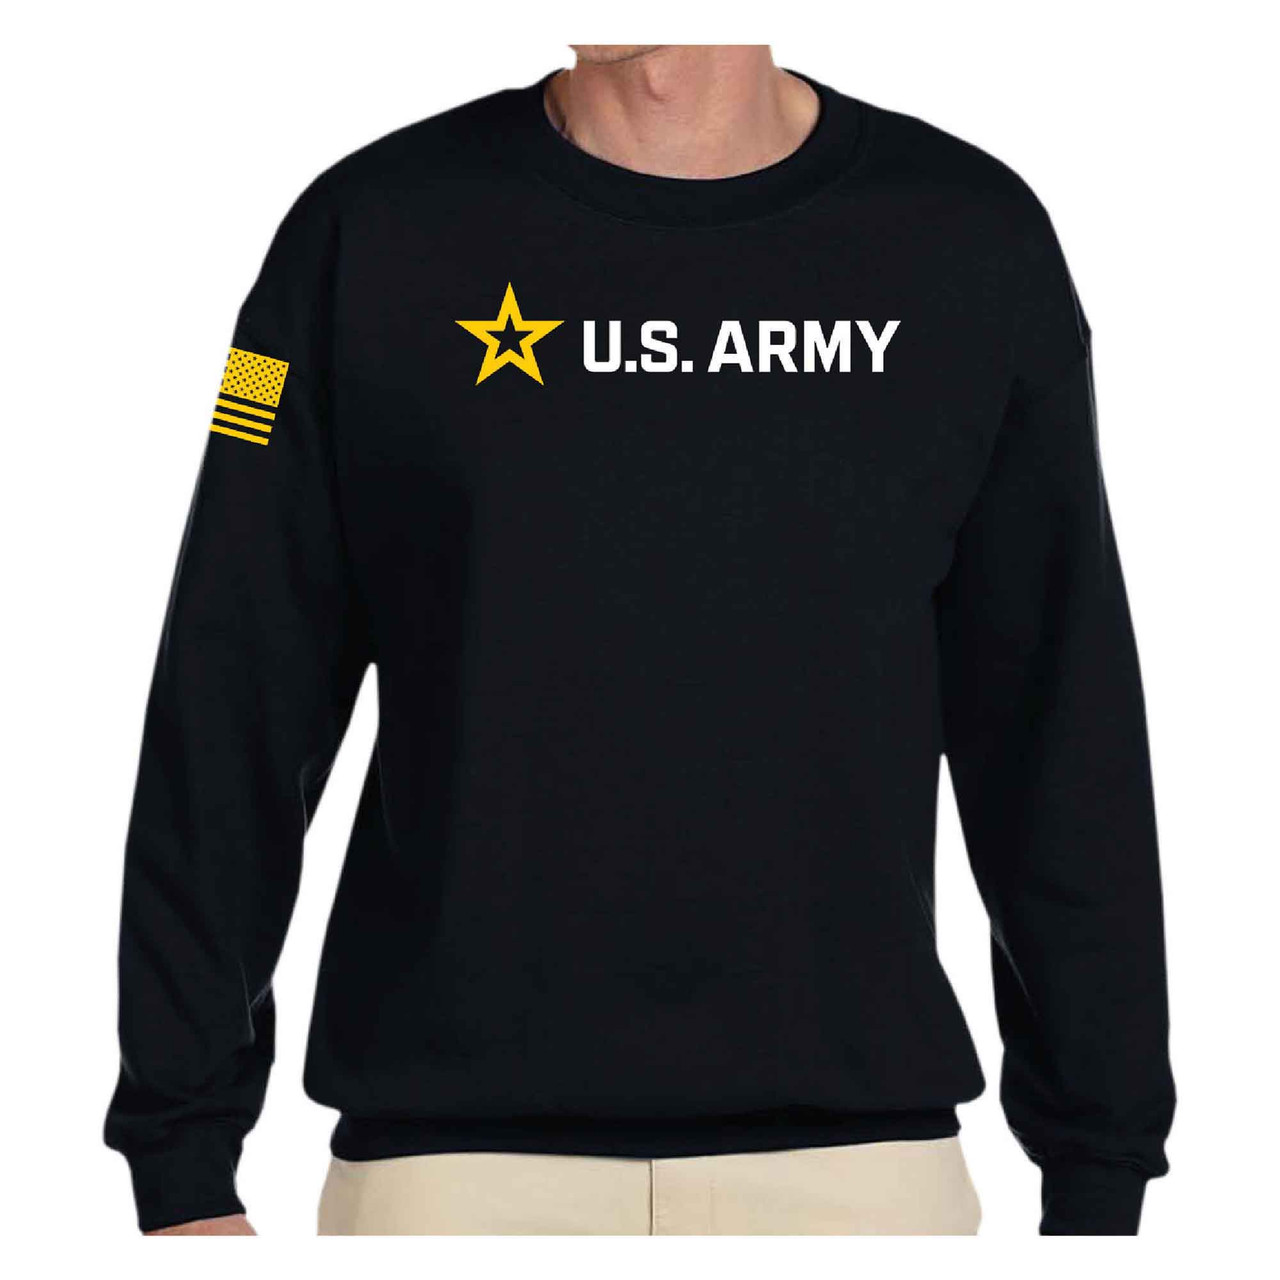 NEW Officially Licensed United States Army Logo and Slogan on Graphic Black Crewneck Sweatshirt front view